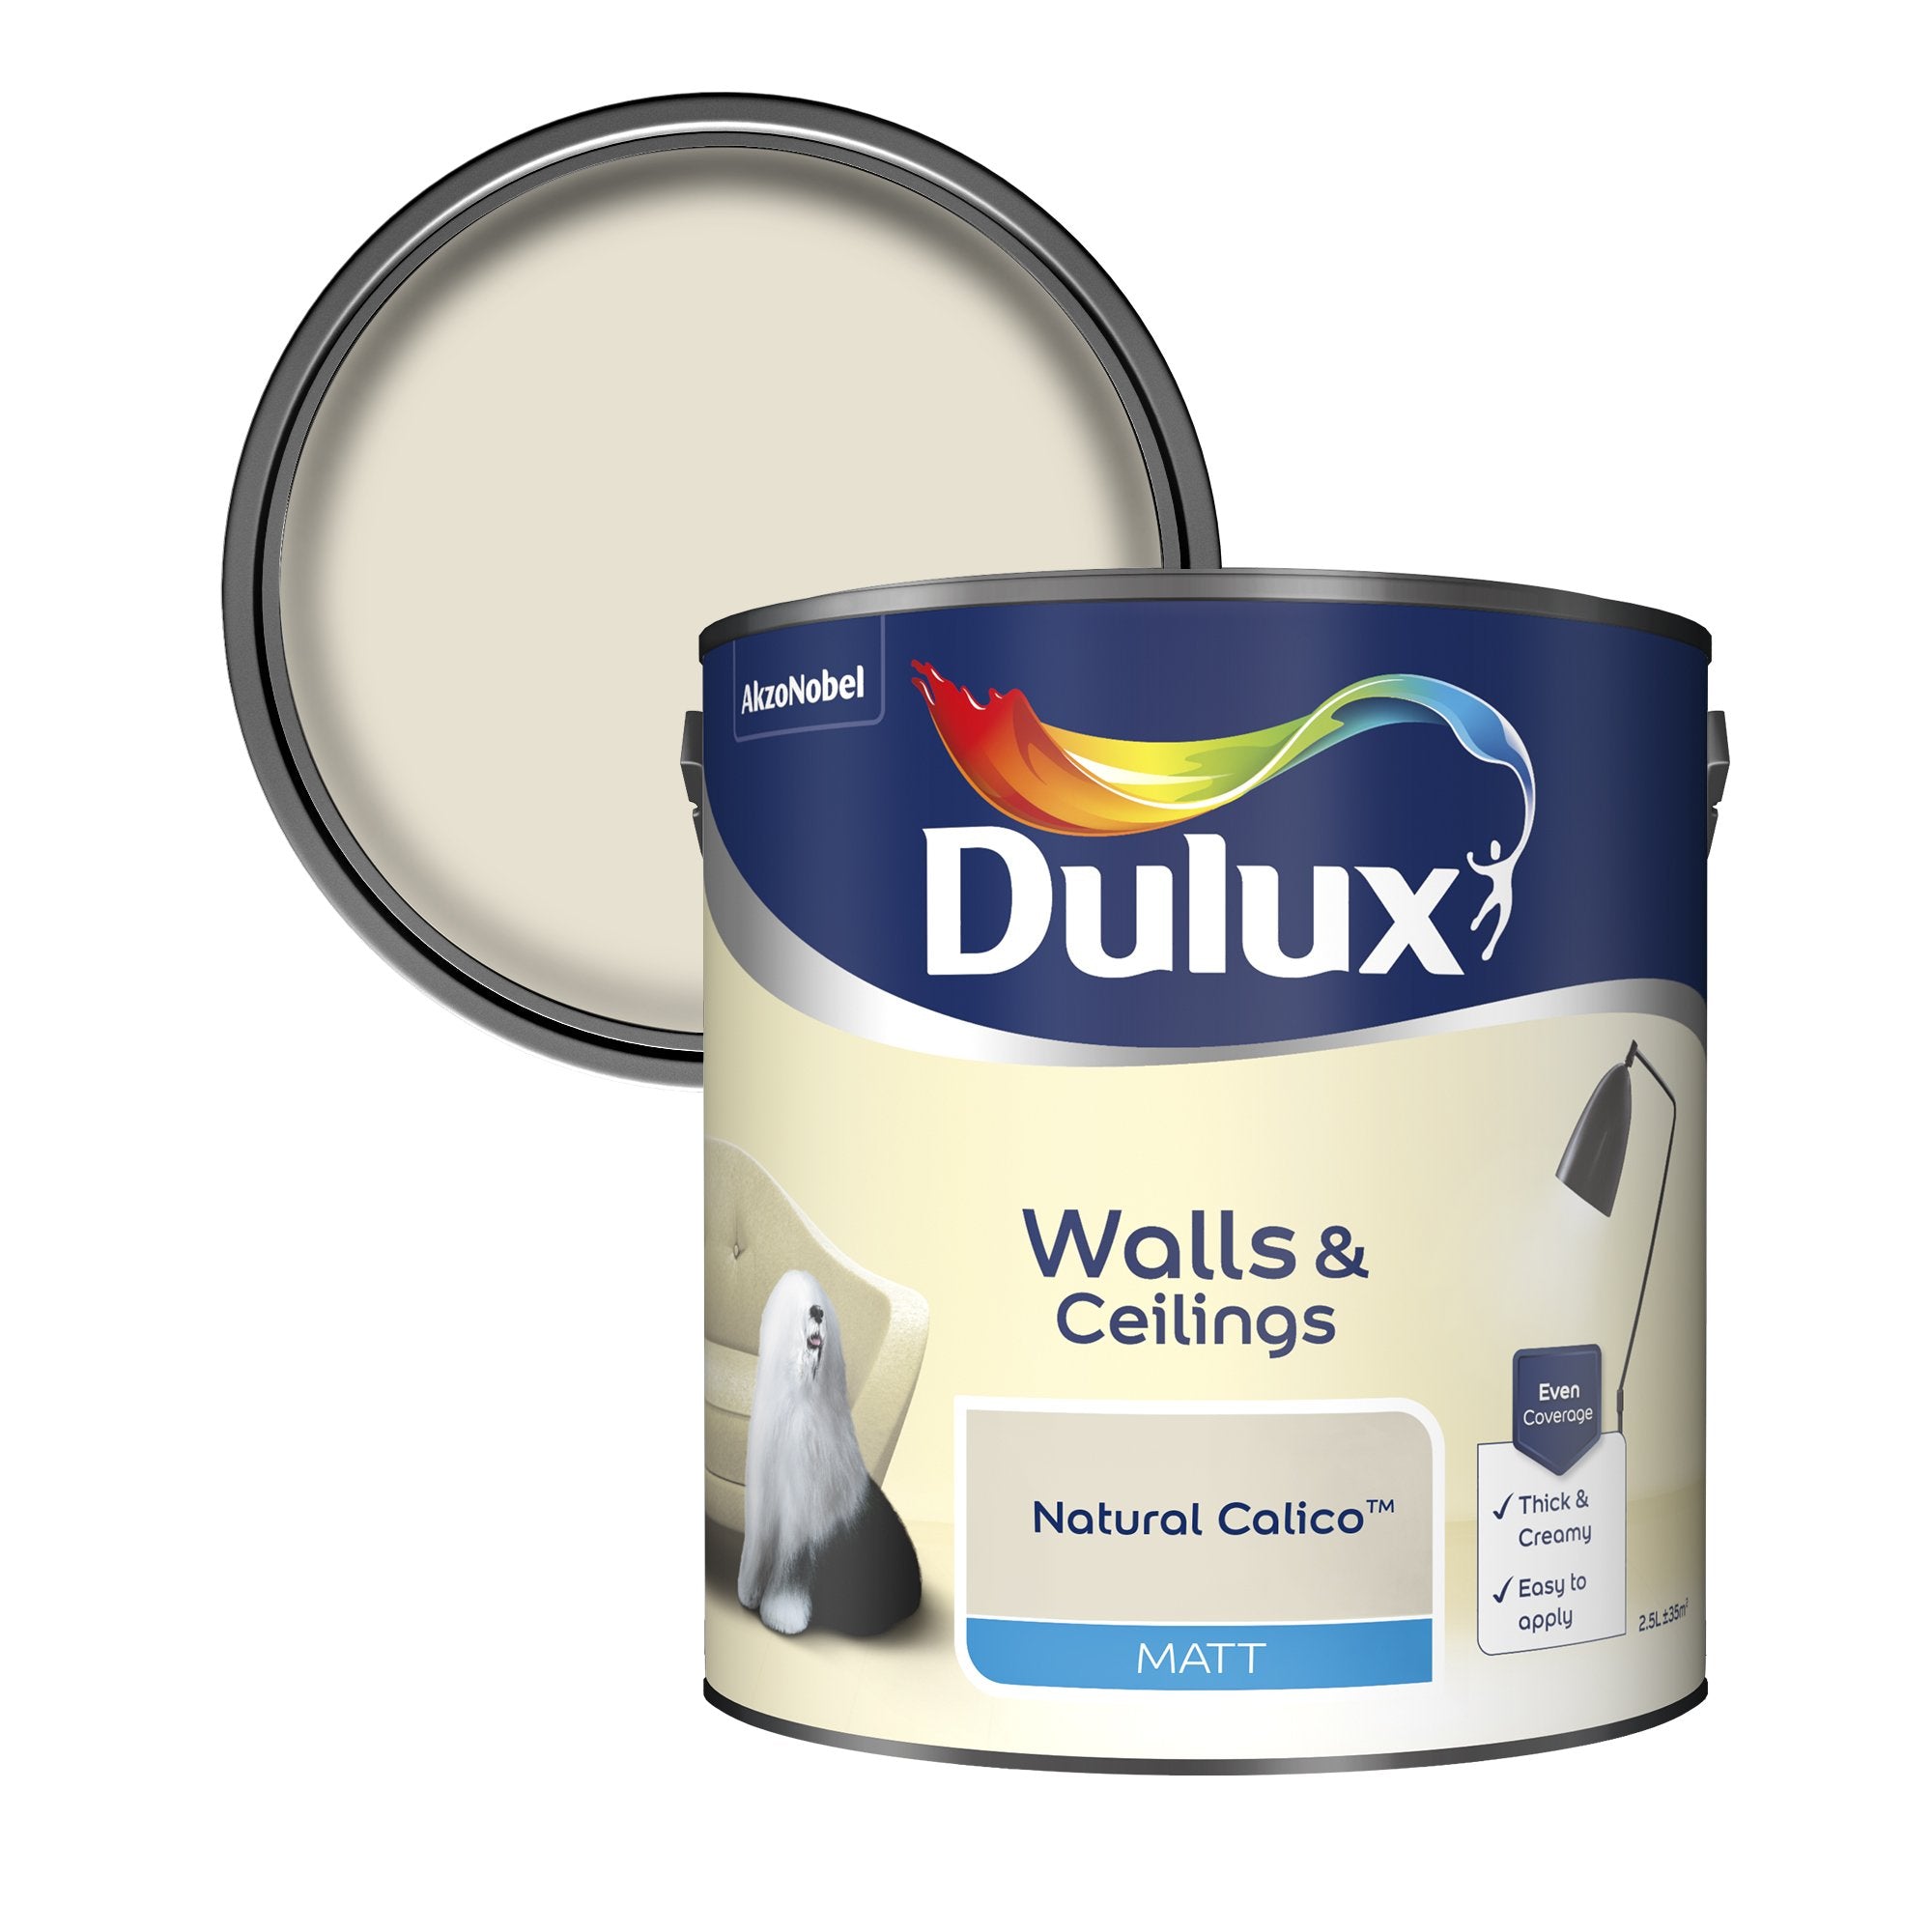 Dulux-Matt-Emulsion-Paint-For-Walls-And-Ceilings-Natural-Calico-2.5L